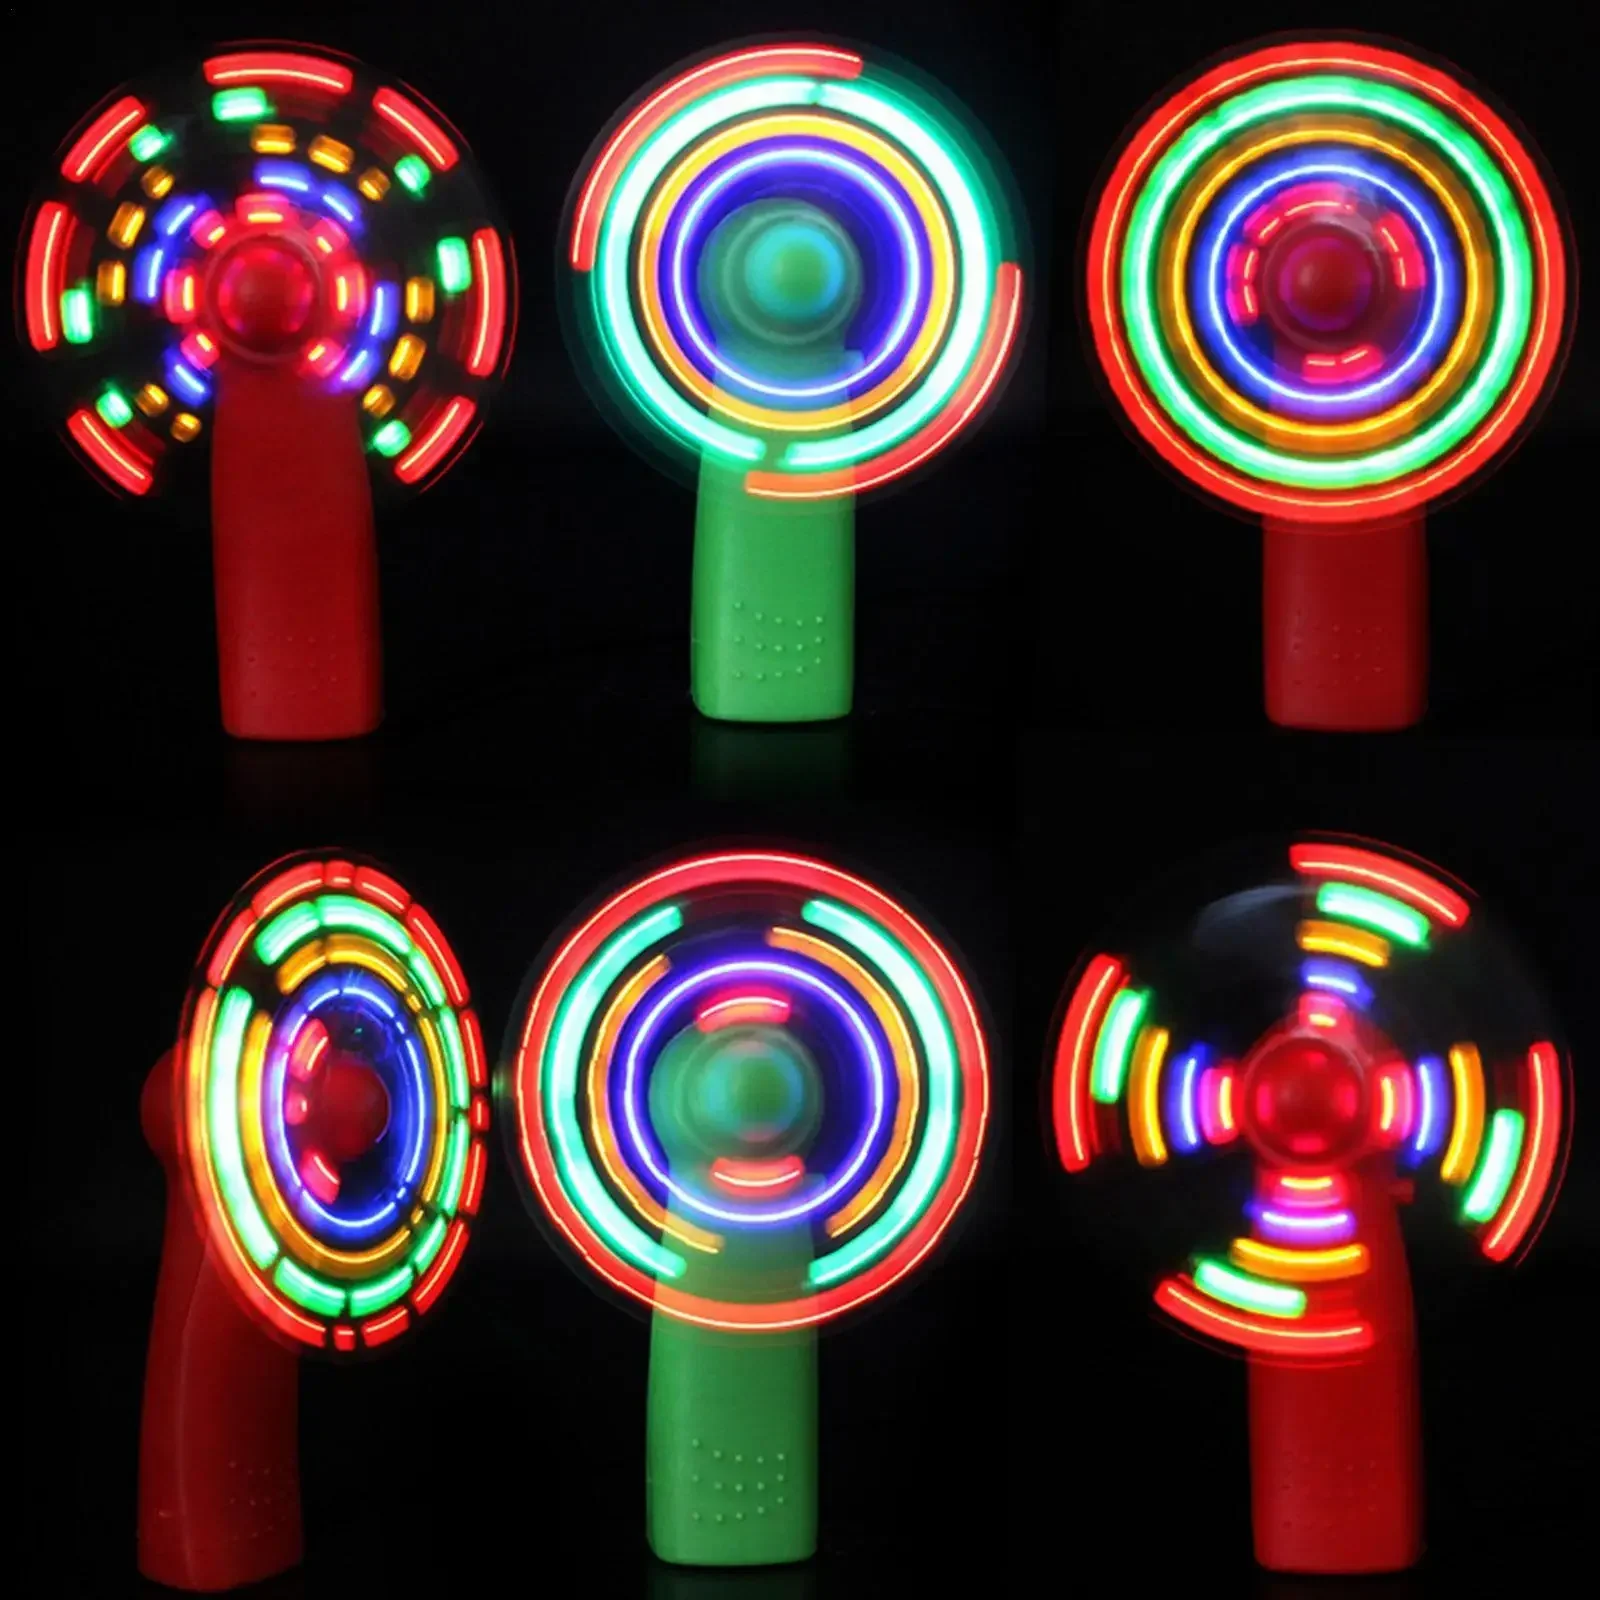 

1PC Mini Fan Luminous Toy Colorful Lights Handheld Electric Cooling Fan Changing LED Light Concert Props Toys Kids Colored Fans